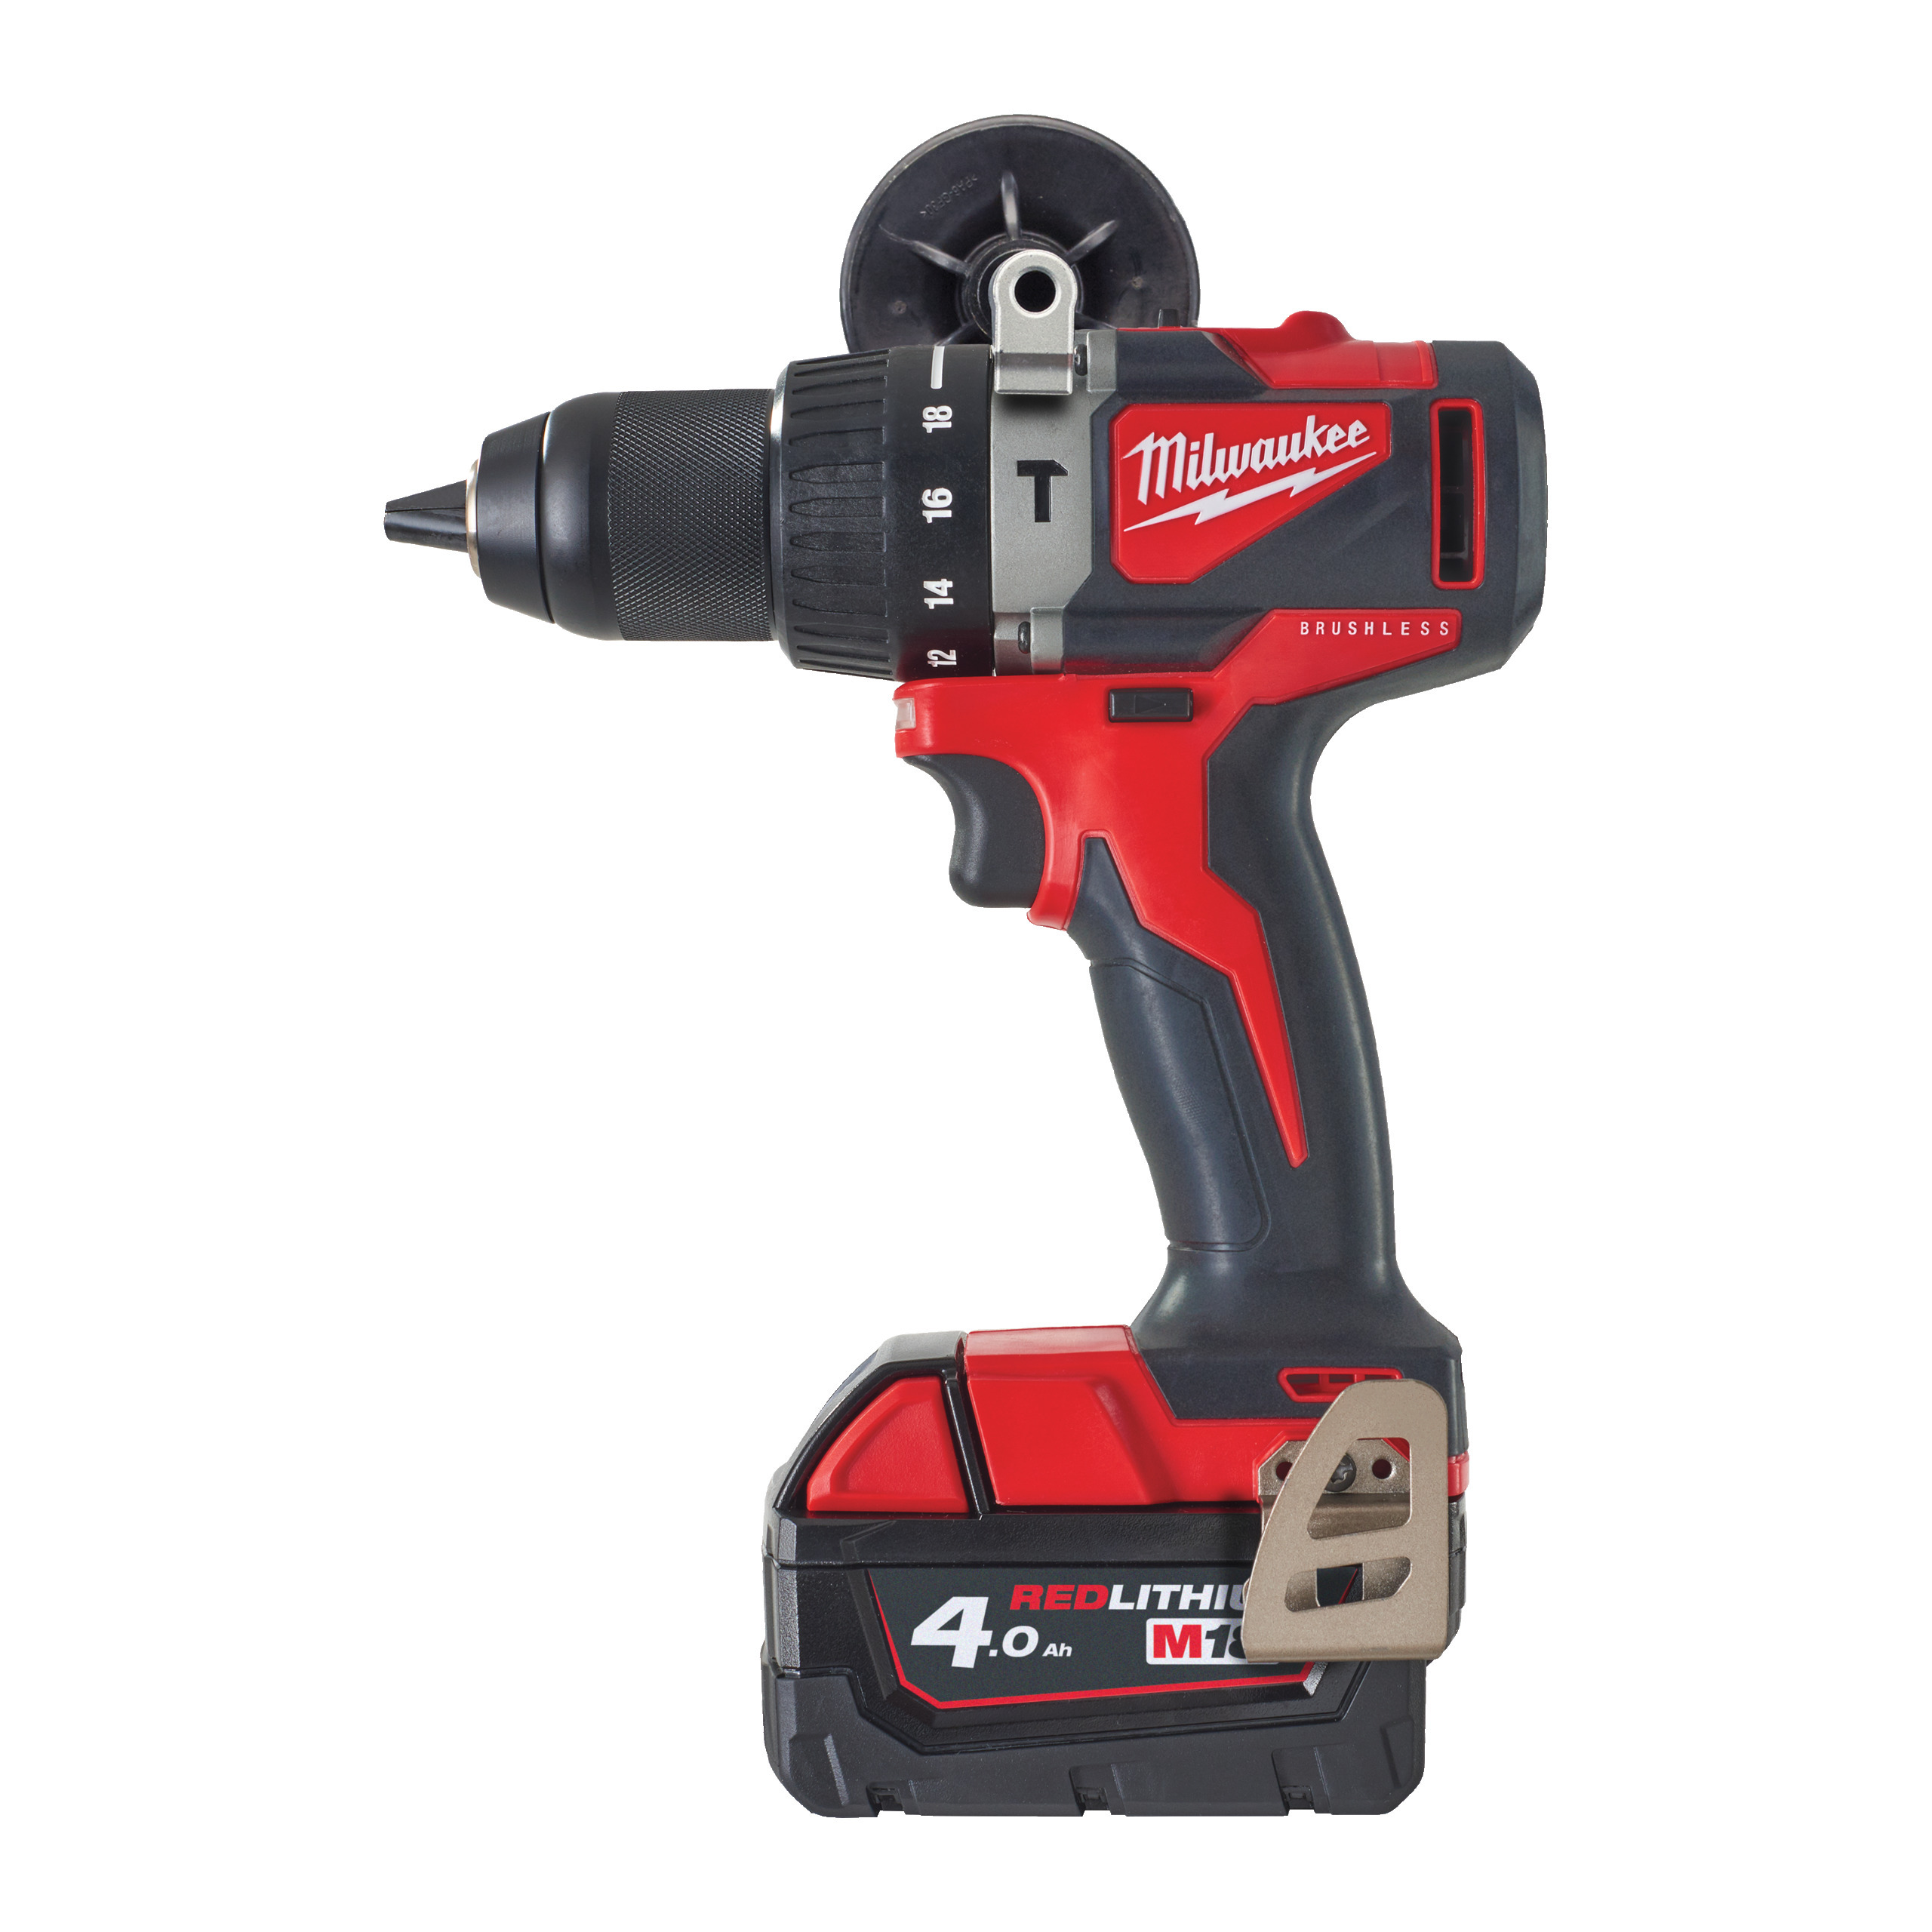 Perceuse Percussion BRUSHLESS,18V, 4,0Ah, 85 Nm MILWAUKEE M18 BLPD2-402X - 4933464560